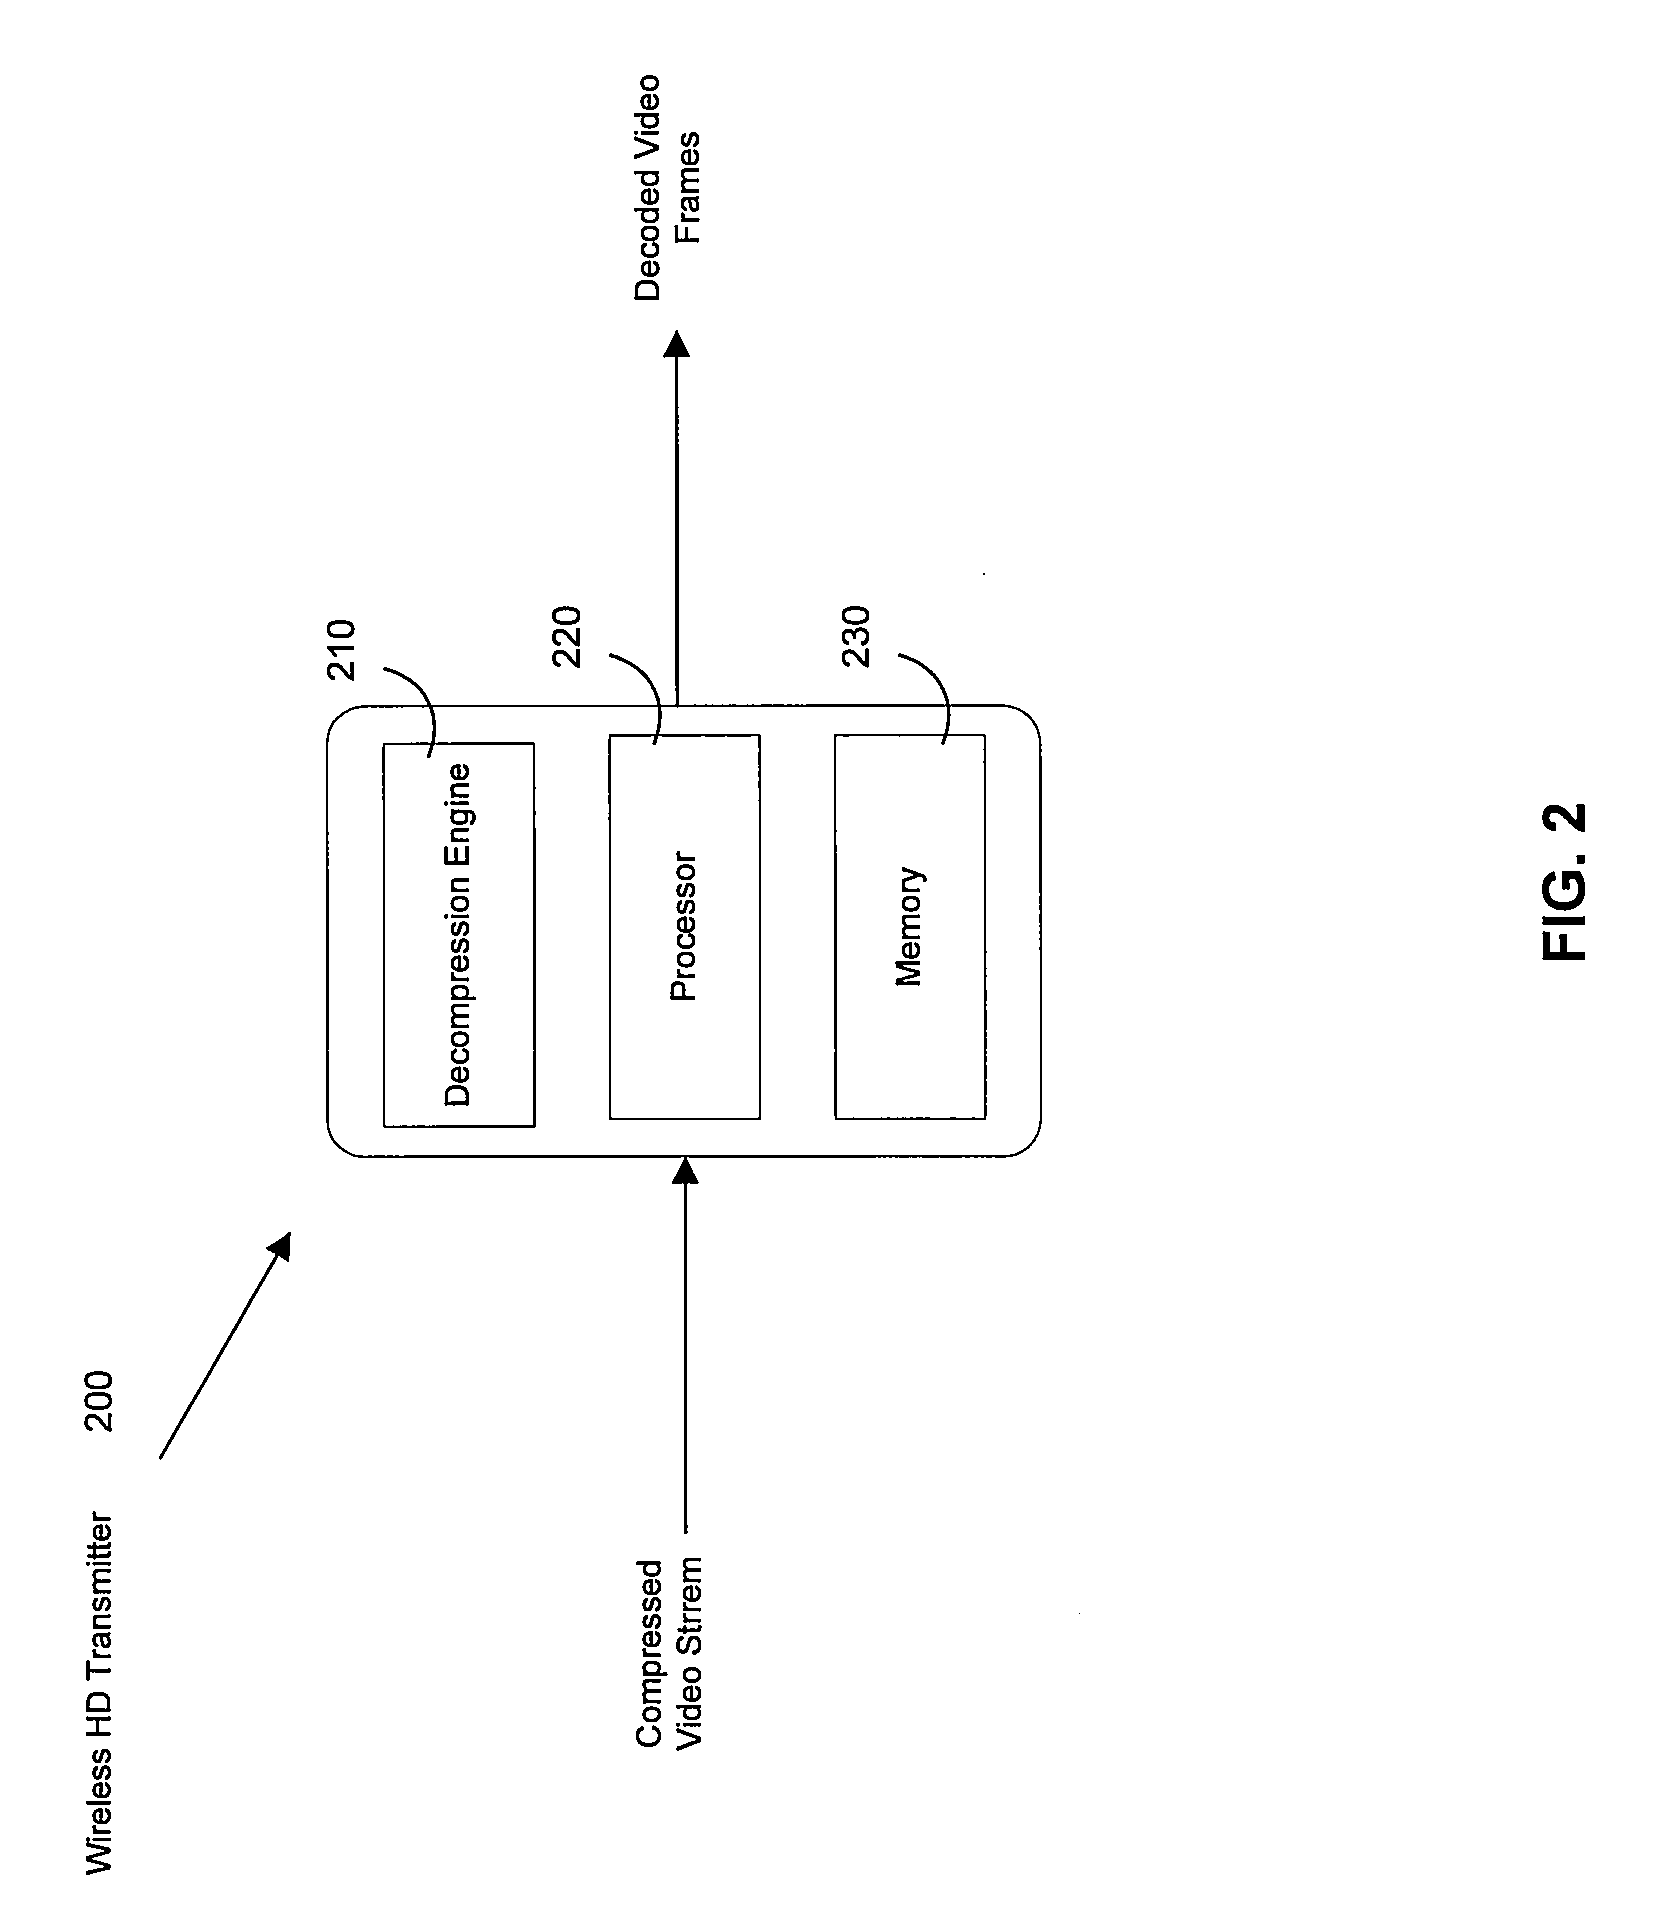 Method and system for motion-compensated frame-rate up-conversion for both compressed and decompressed video bitstreams